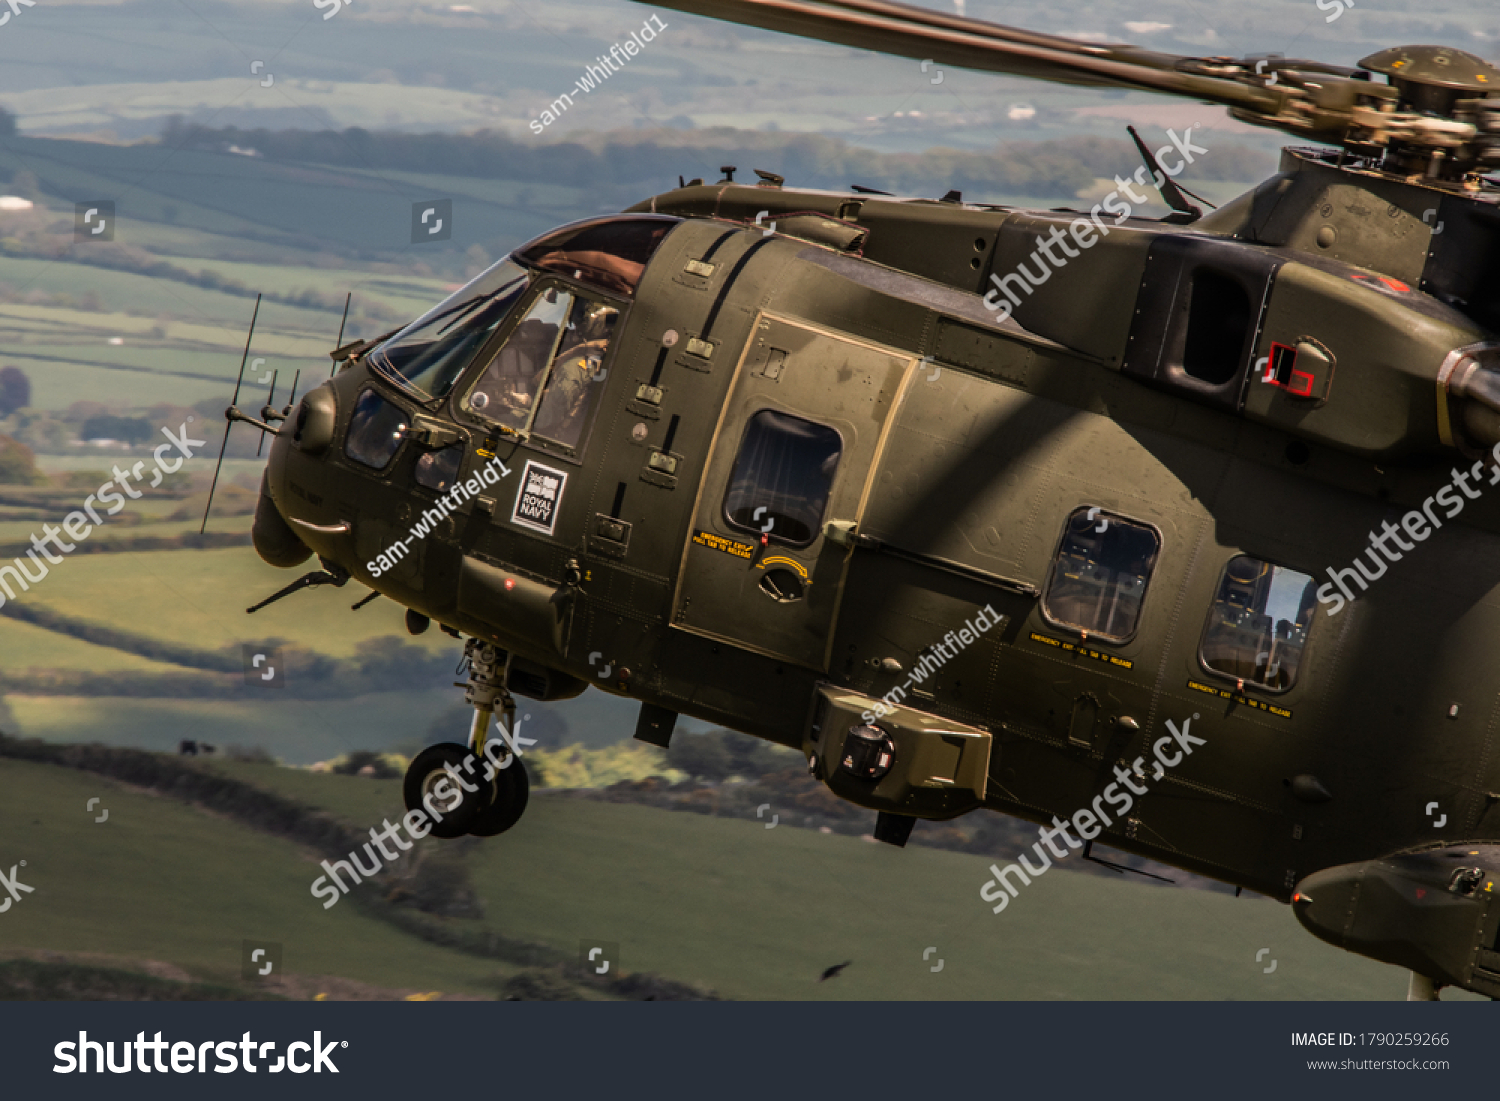 Military Helicopter Merlin EH101 flying on a training mission. #1790259266